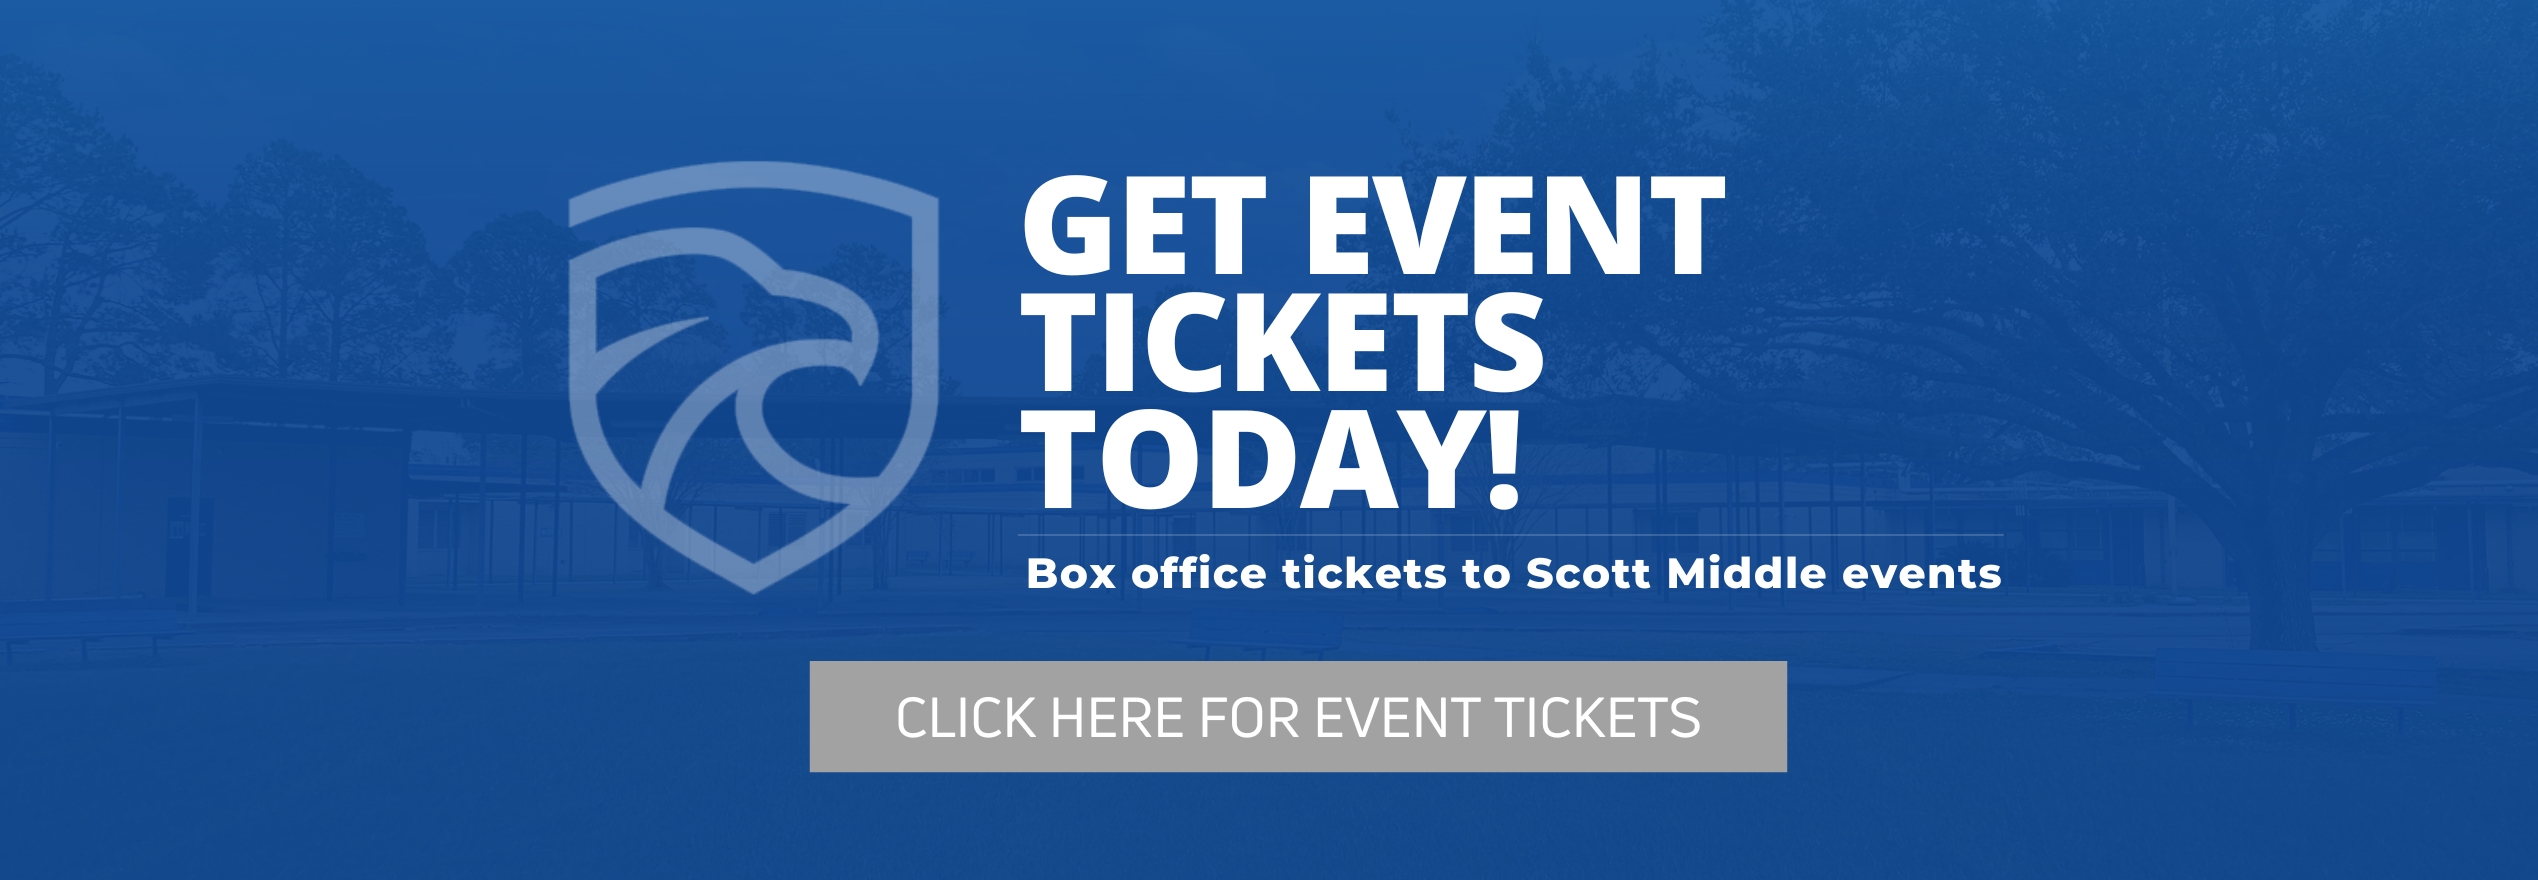 Scott Middle Event Tickets